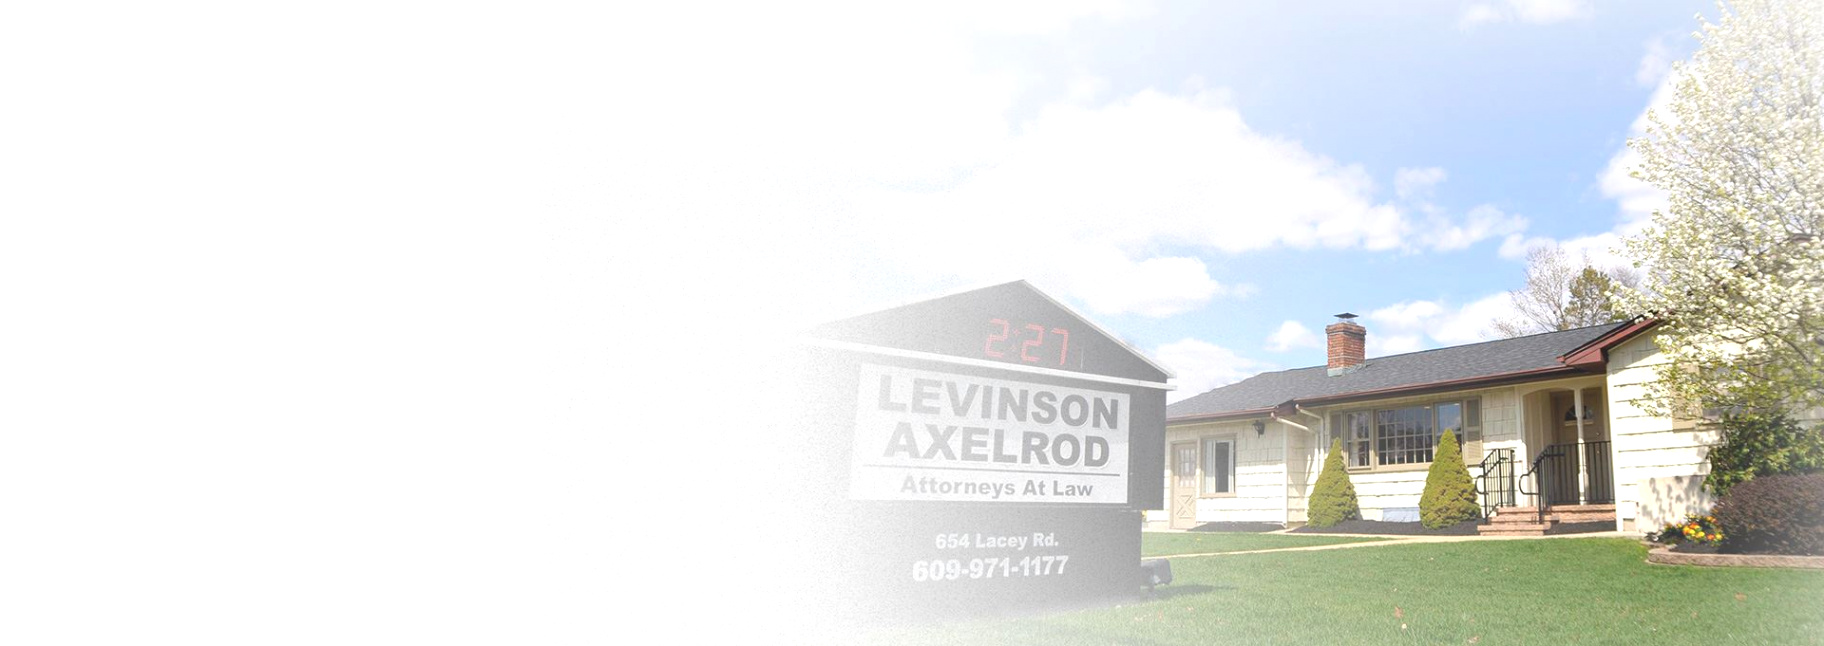 Personal Injury Lawyer toms River Dans forked River Personal Injury Lawyers Levinson Axelrod, P.a.